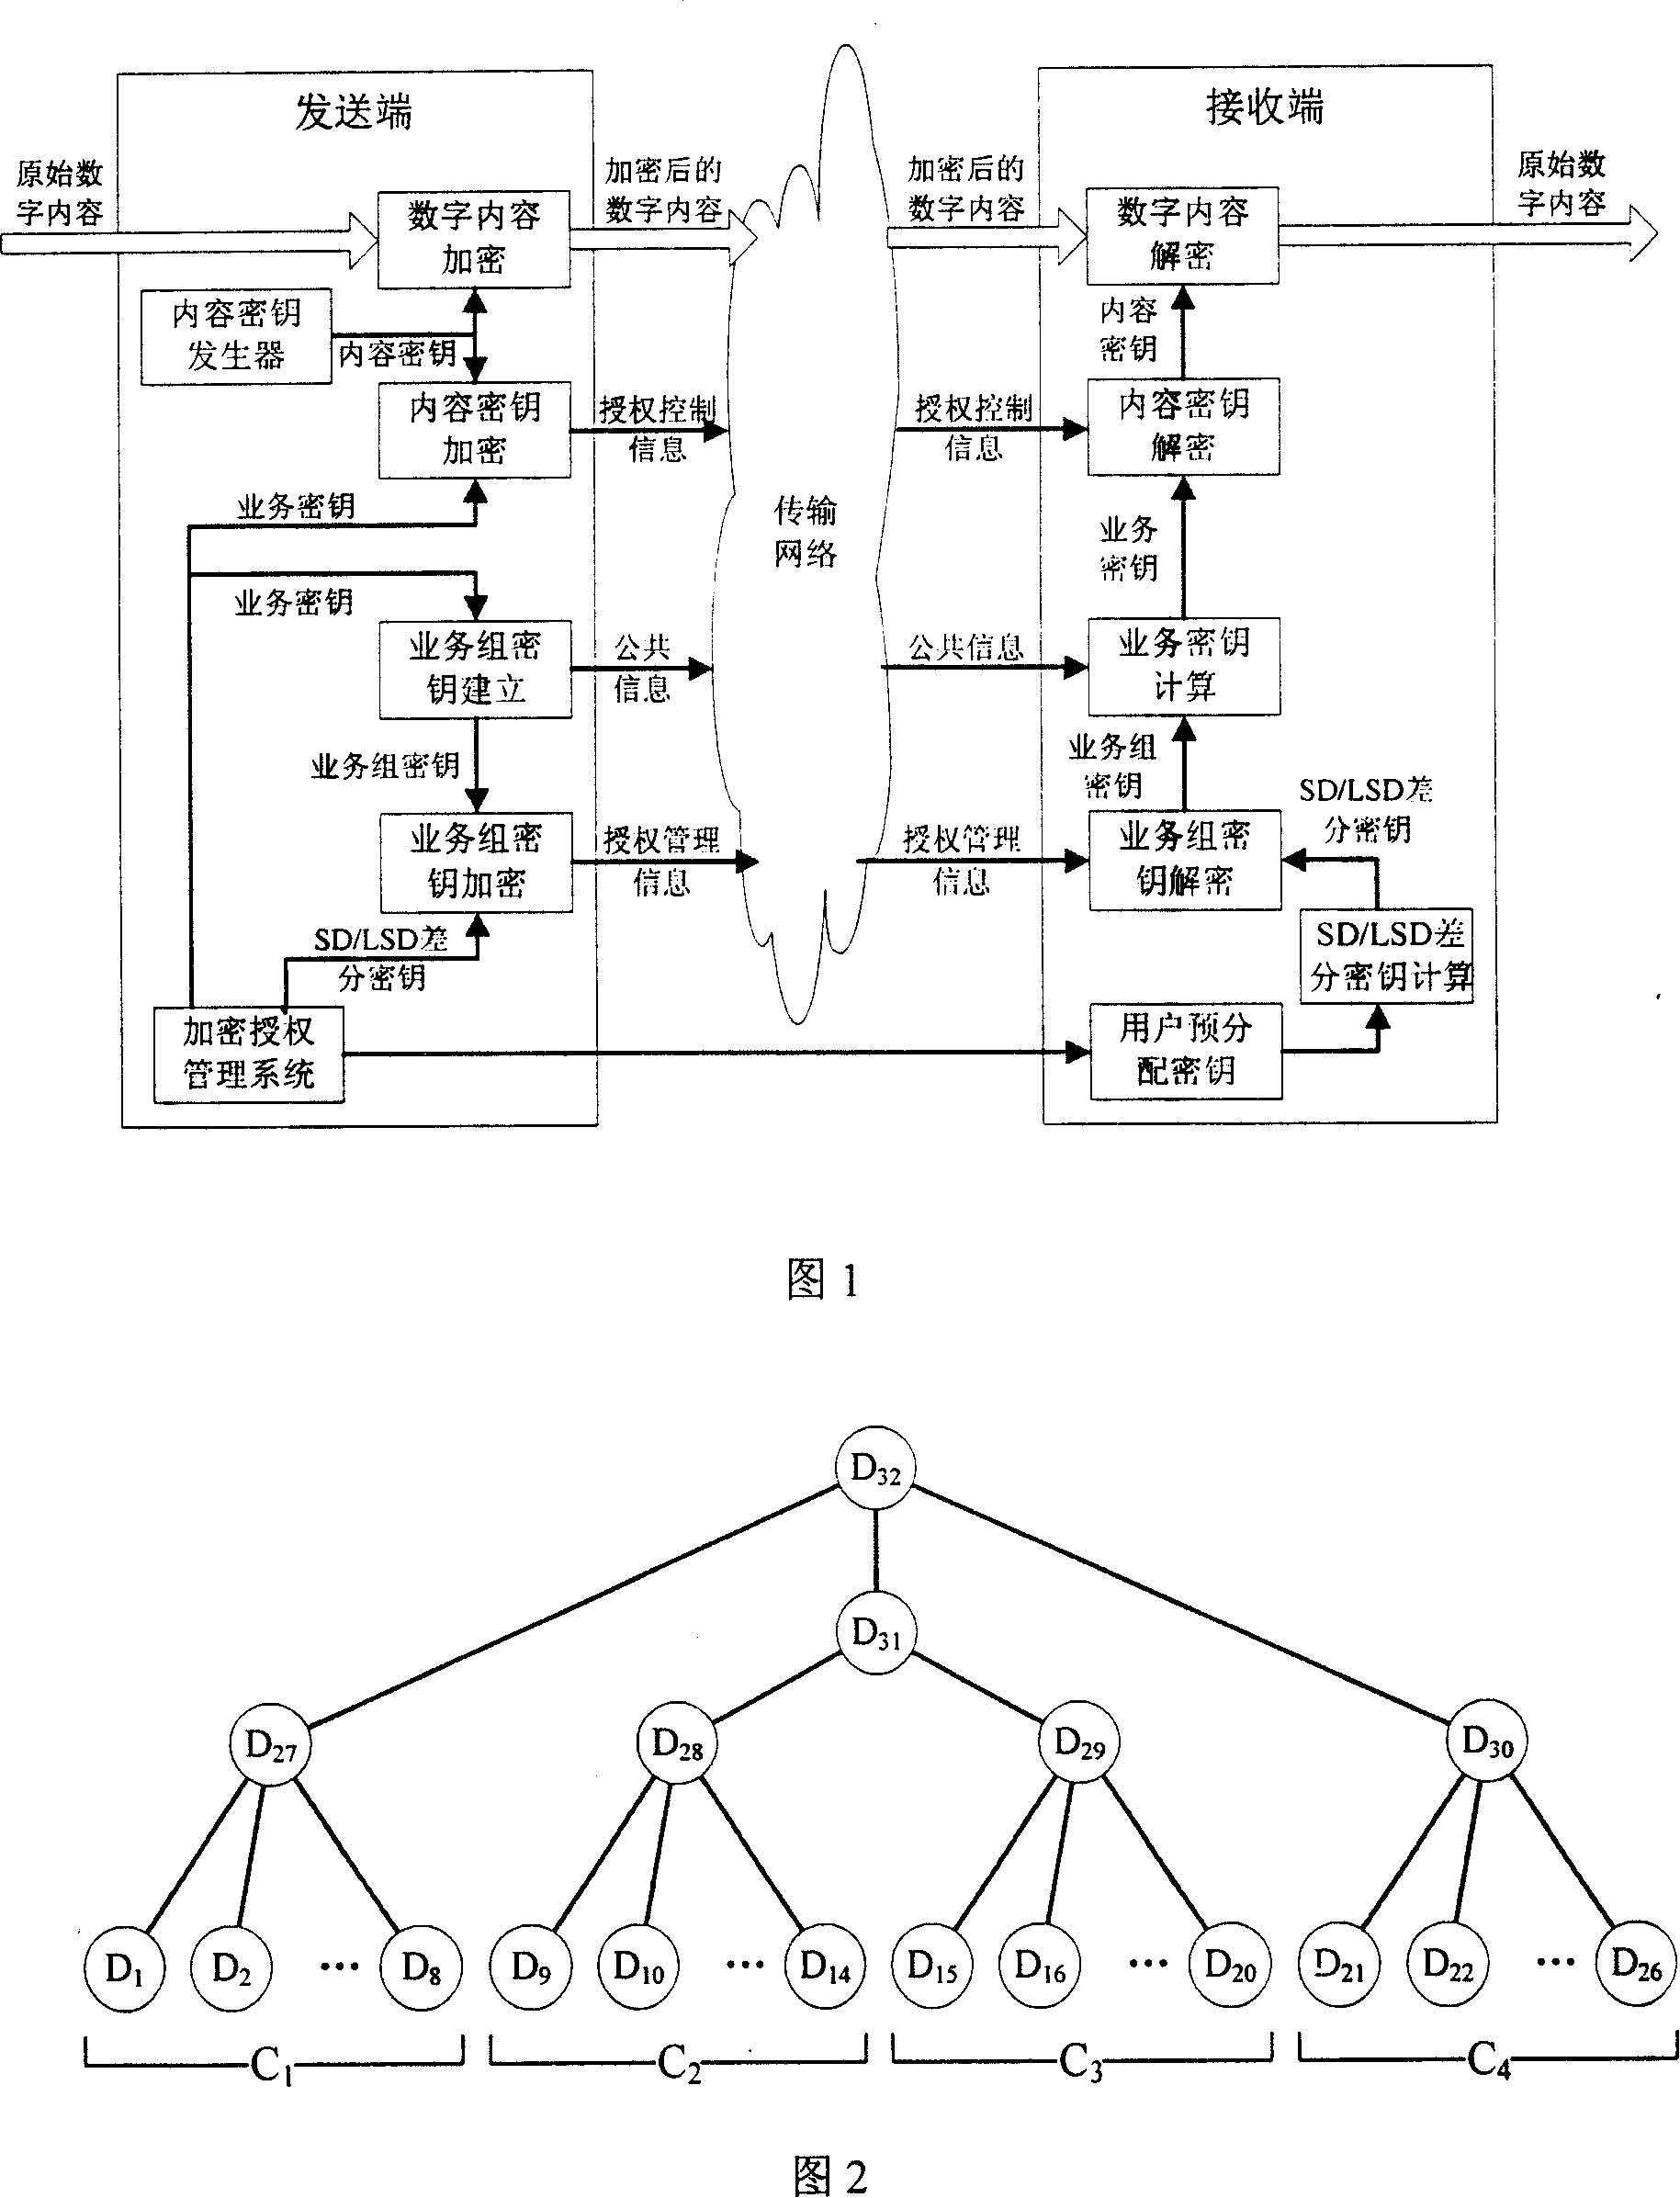 A L4 encryption method of double group of encrypted authorization management system